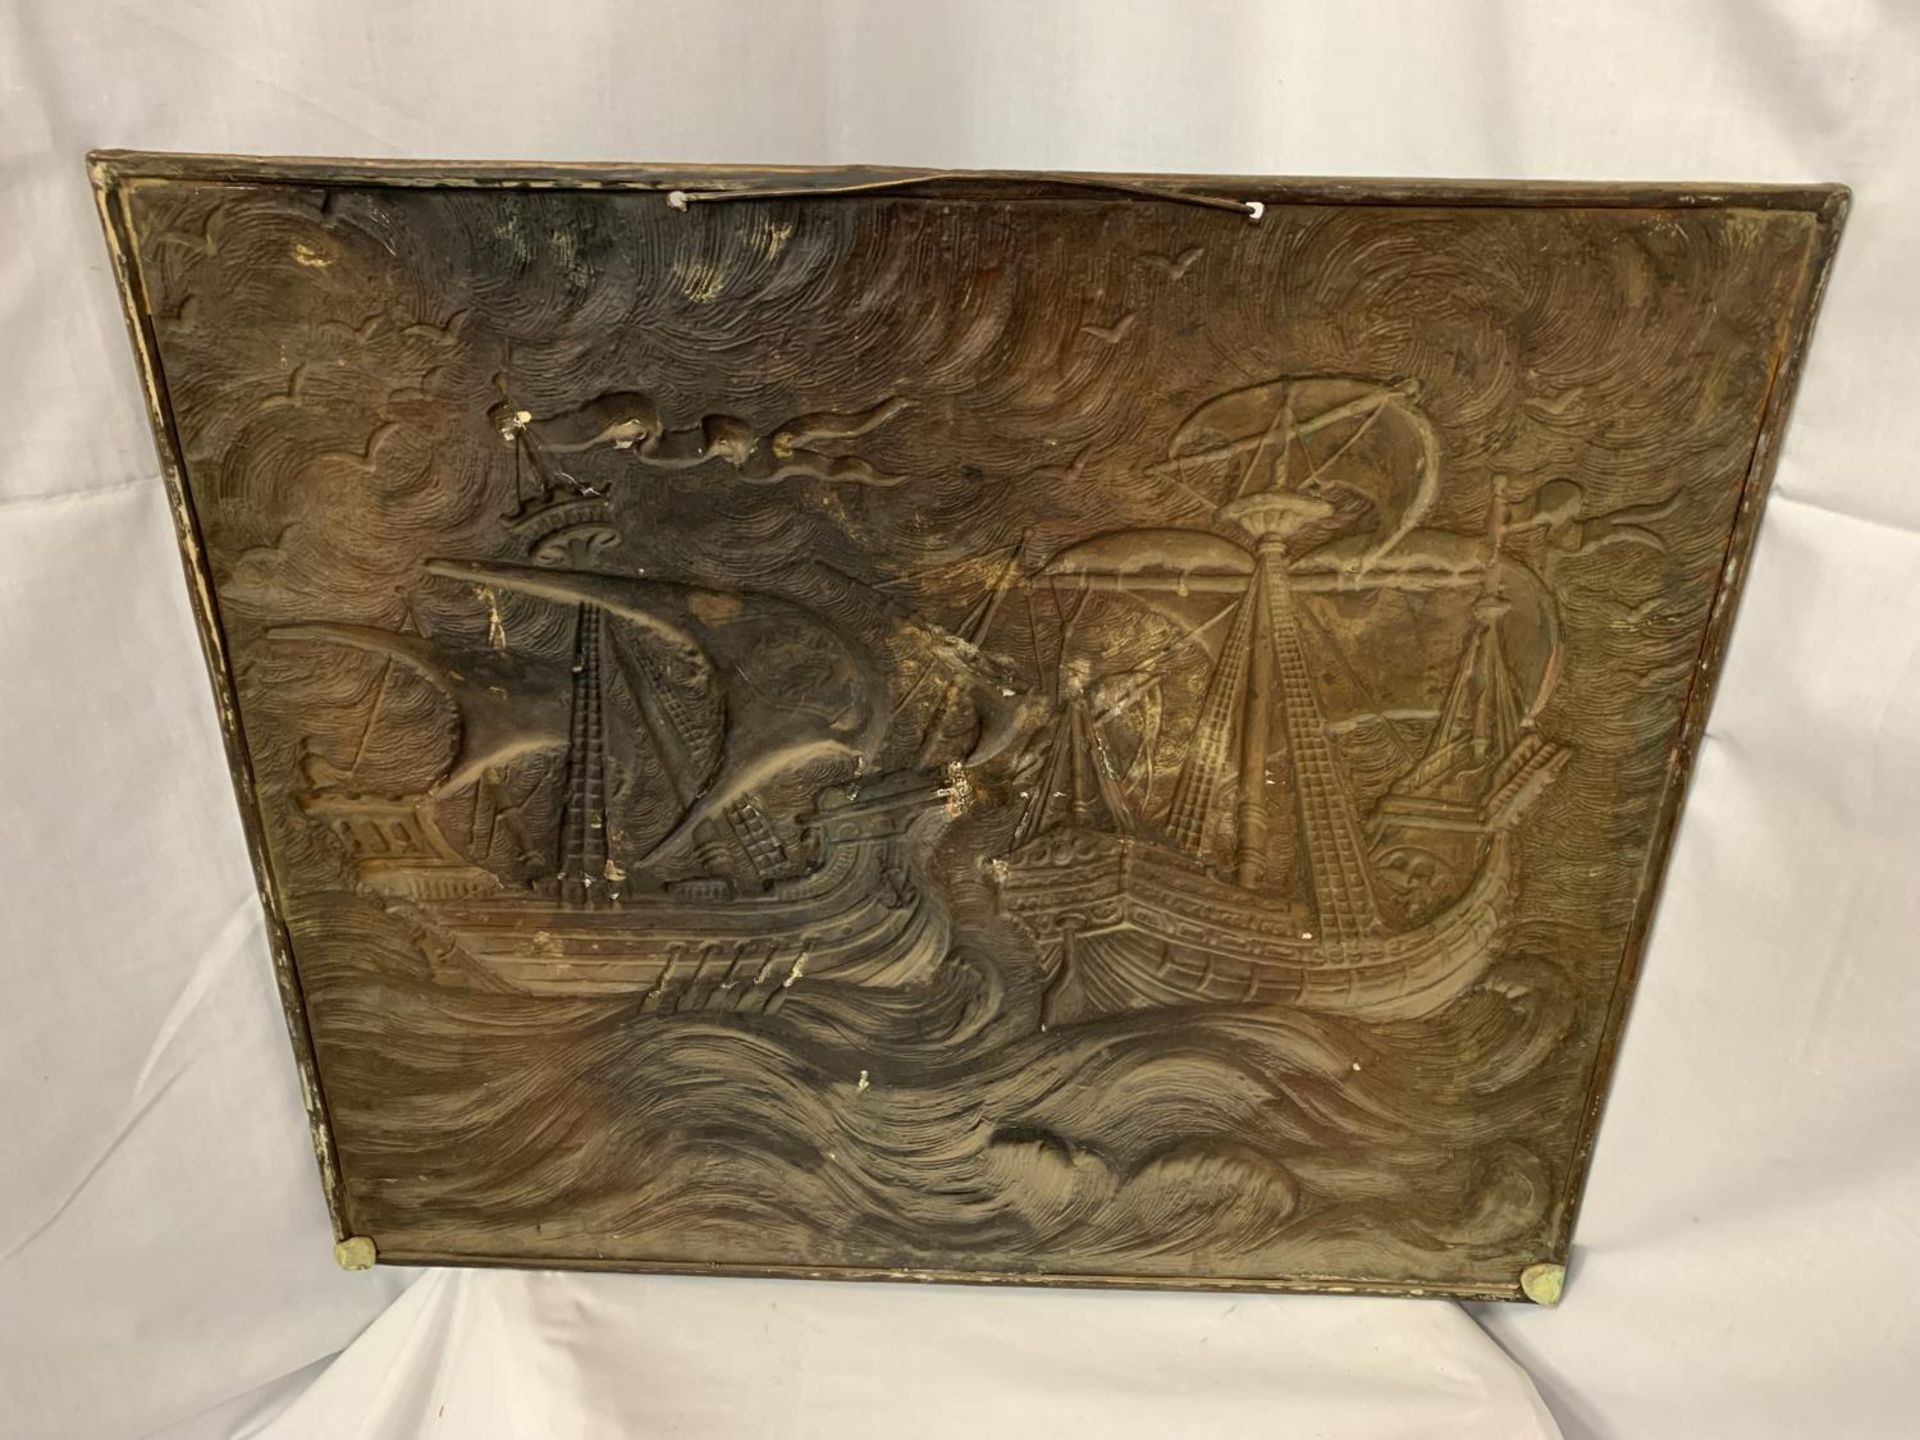 A LARGE BRASS WALL PLAQUE DEPICTING A SEA AND GALLEON SCENE 67CM X 58CM - Image 2 of 3